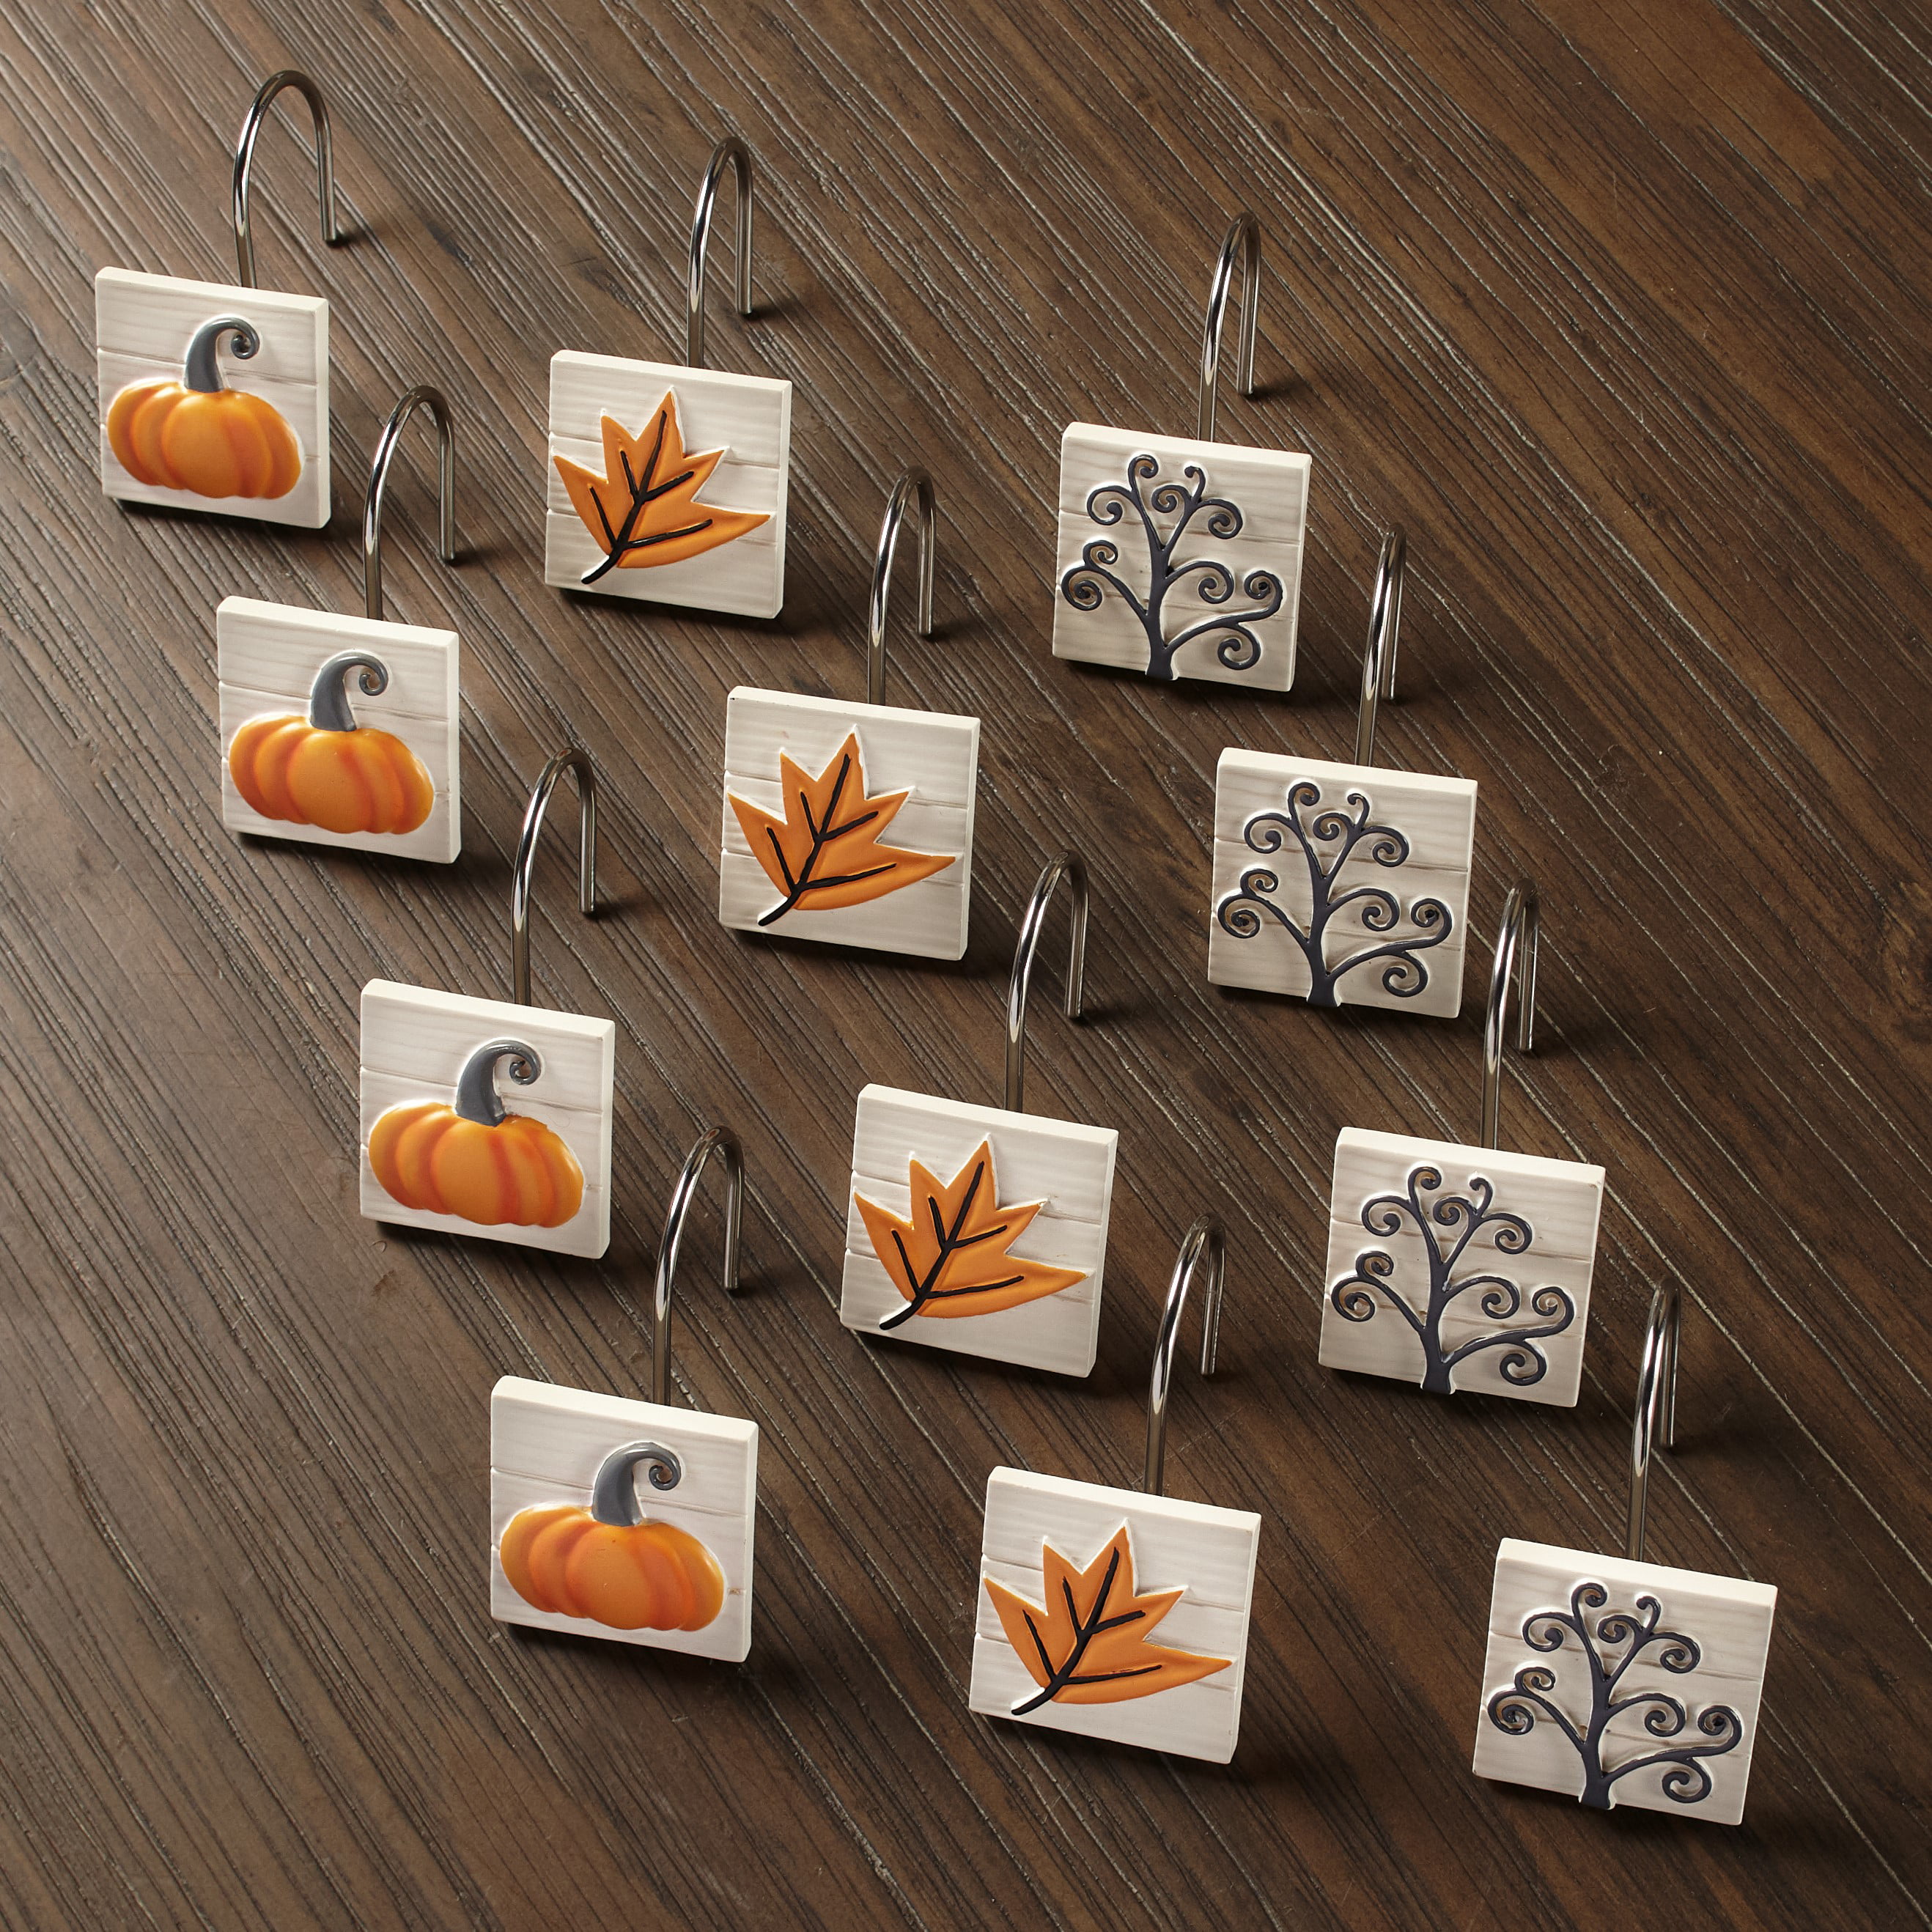 Plaid Pumpkin Shower Curtain Hook Hangers with Autumn Icons Set of 12 